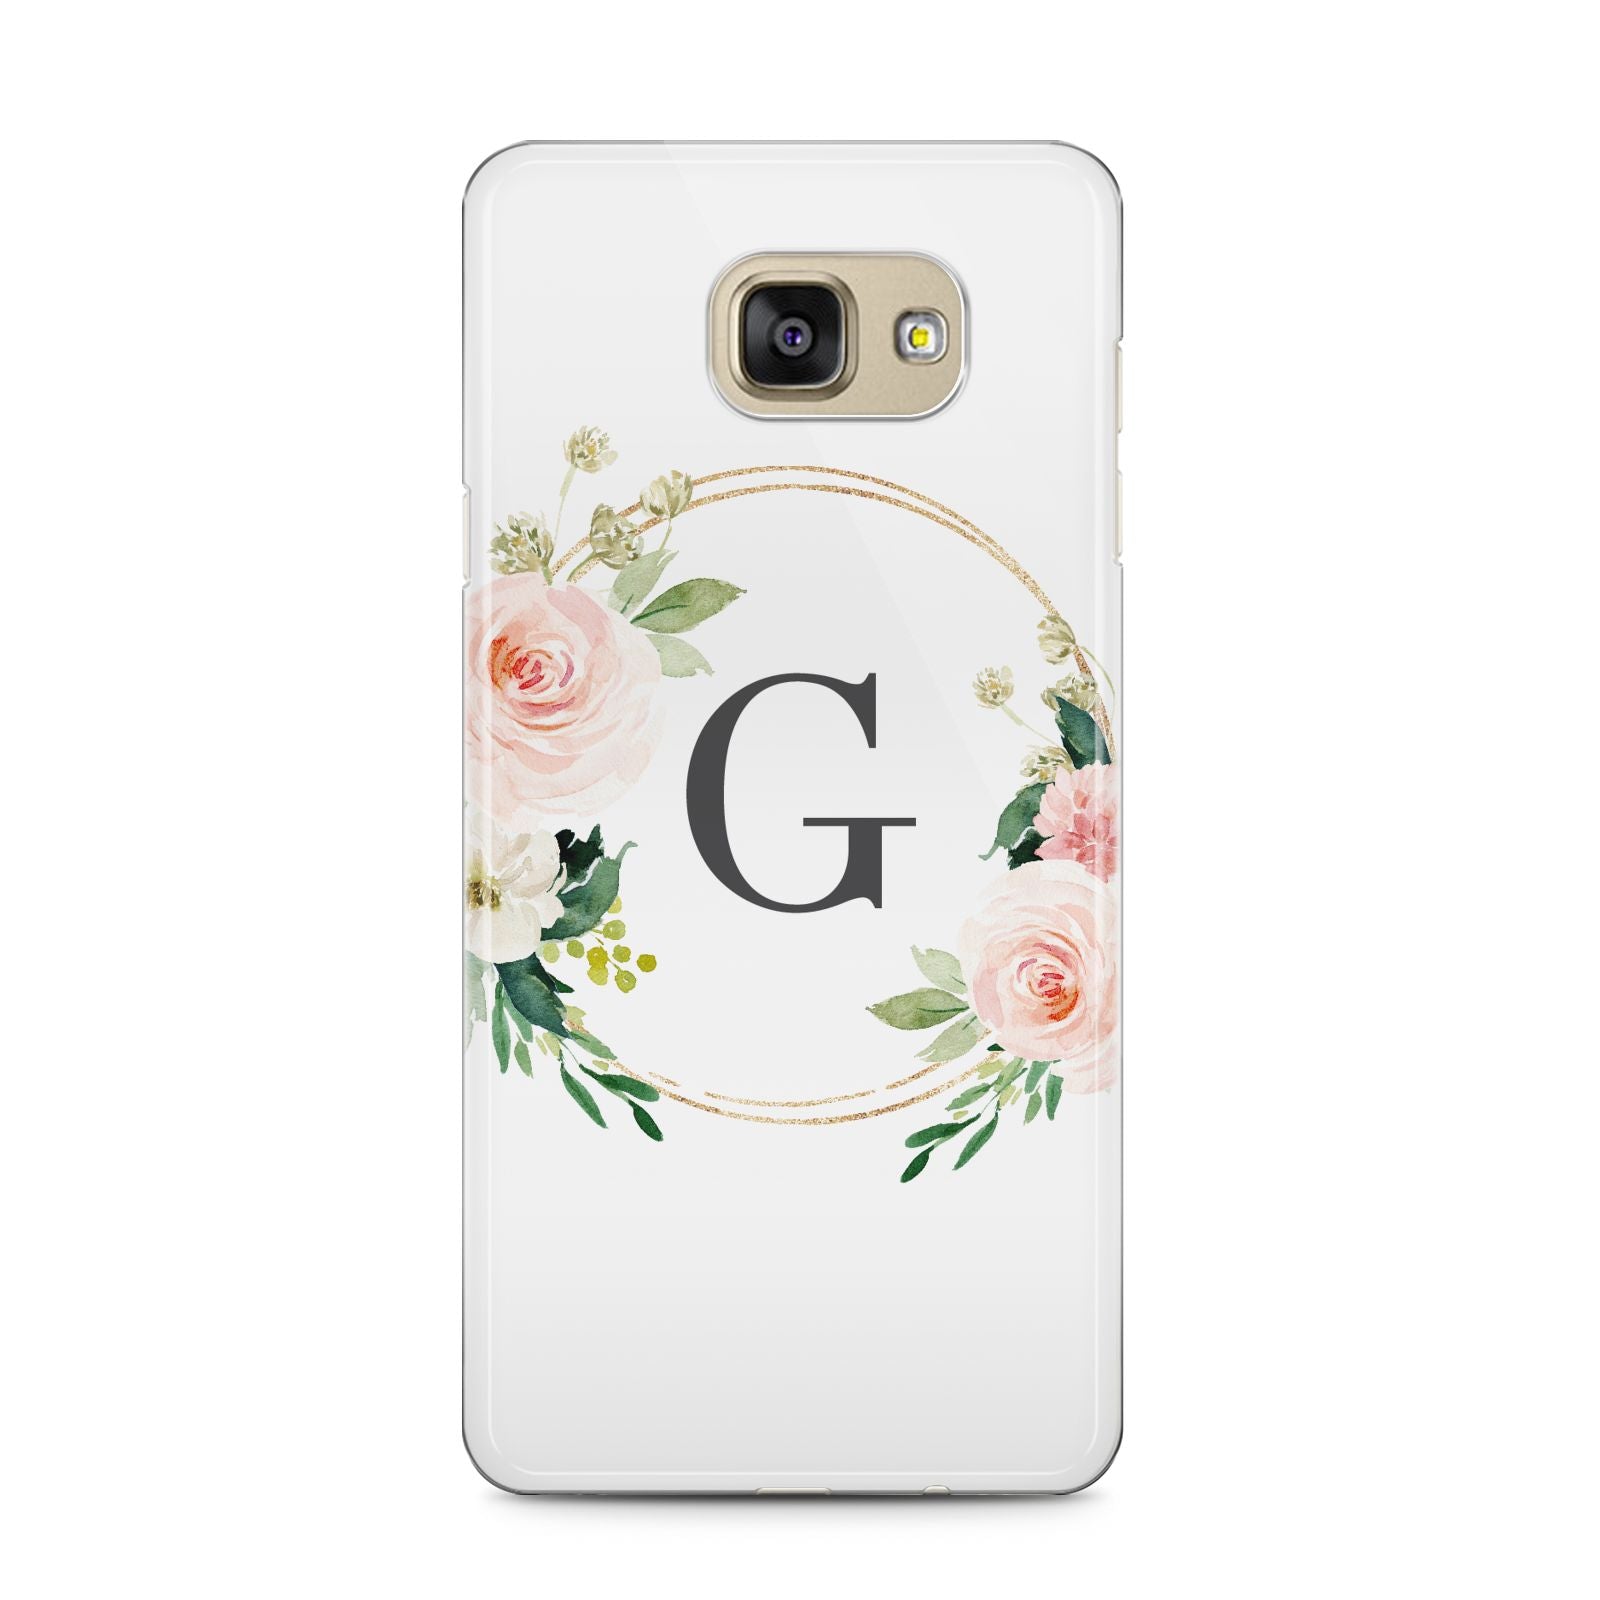 Personalised Blush Floral Wreath Samsung Galaxy A5 2016 Case on gold phone